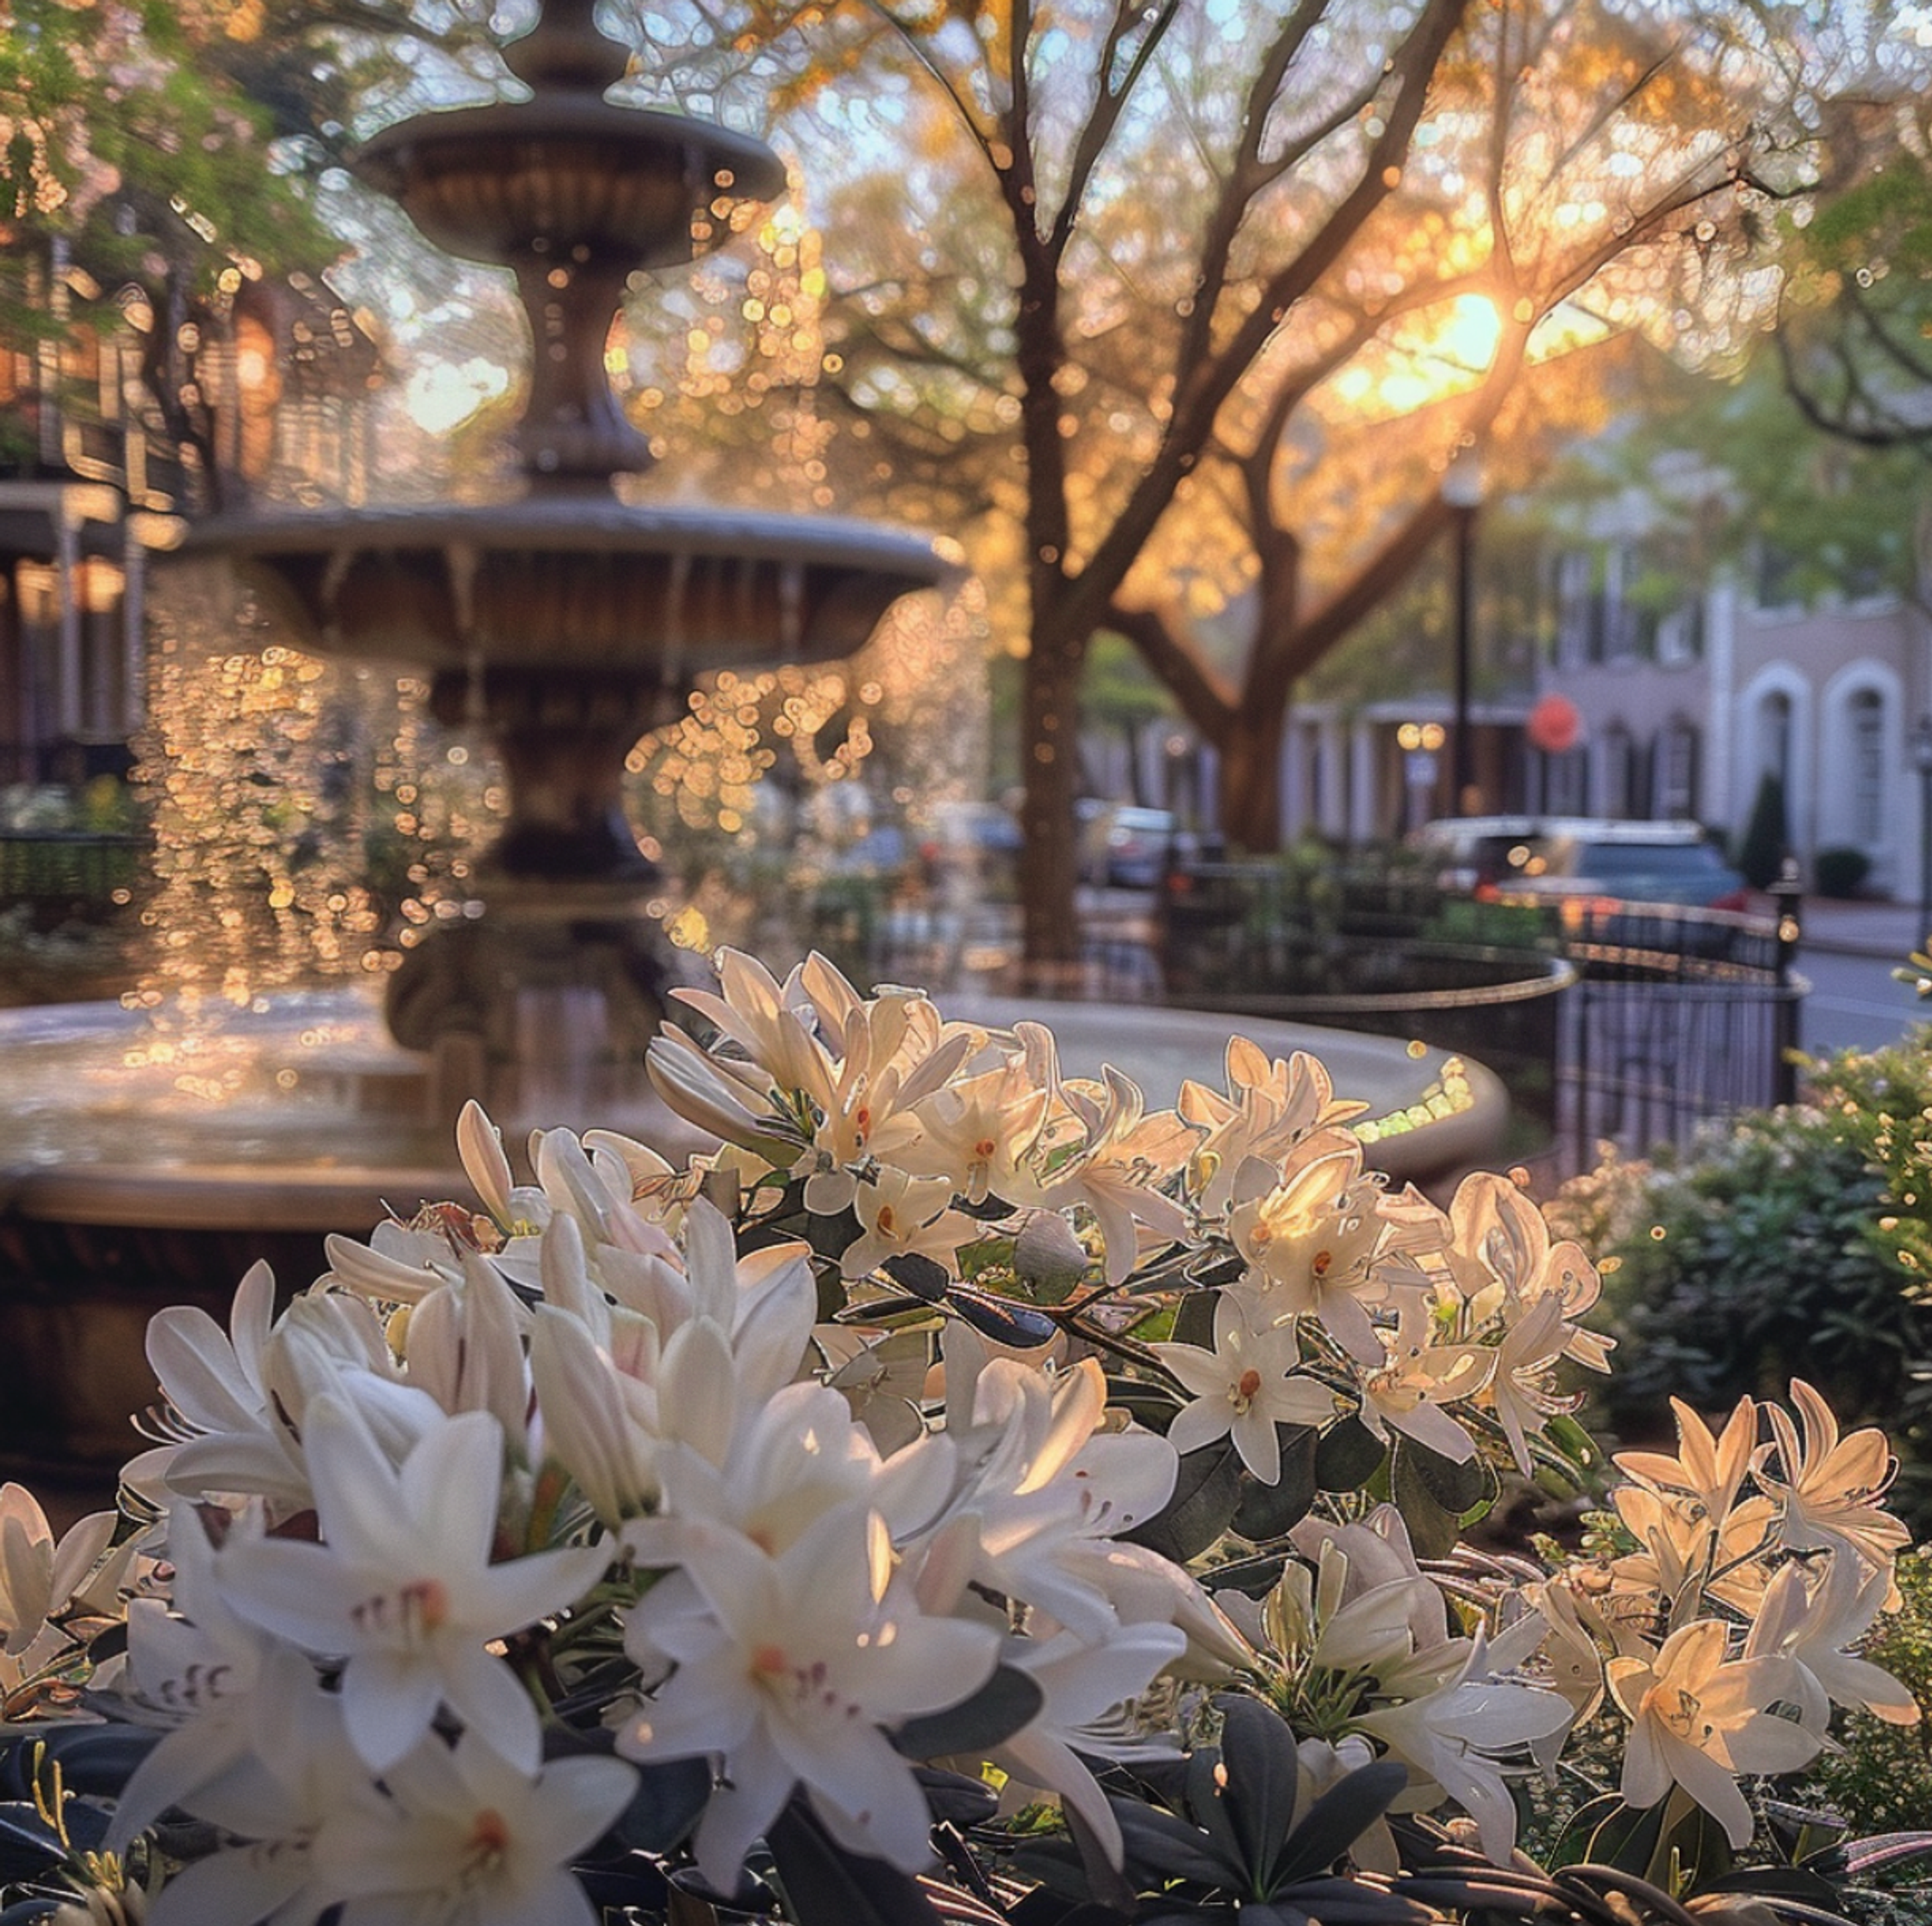 Sunset in Savannah, GA, casts a golden glow on white blossoms in the foreground with a classic fountain softly blurred in the background, evoking the city’s historic charm and the elegance of flower delivery in Savannah.